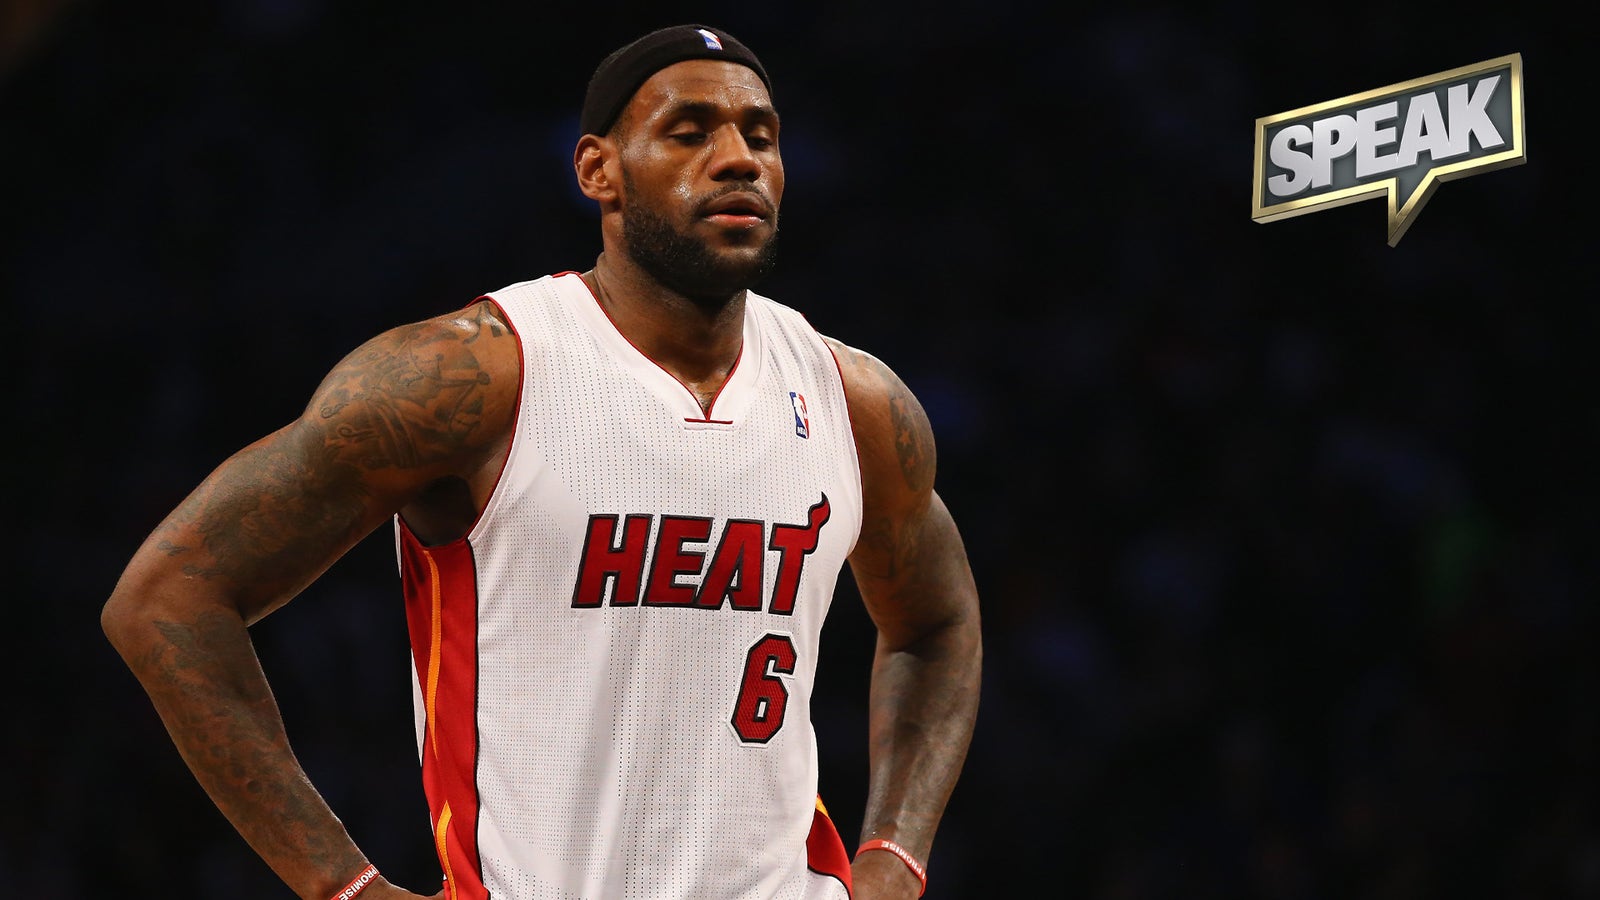 LeBron says he would 'still be at this level' without Heat stint | Speak